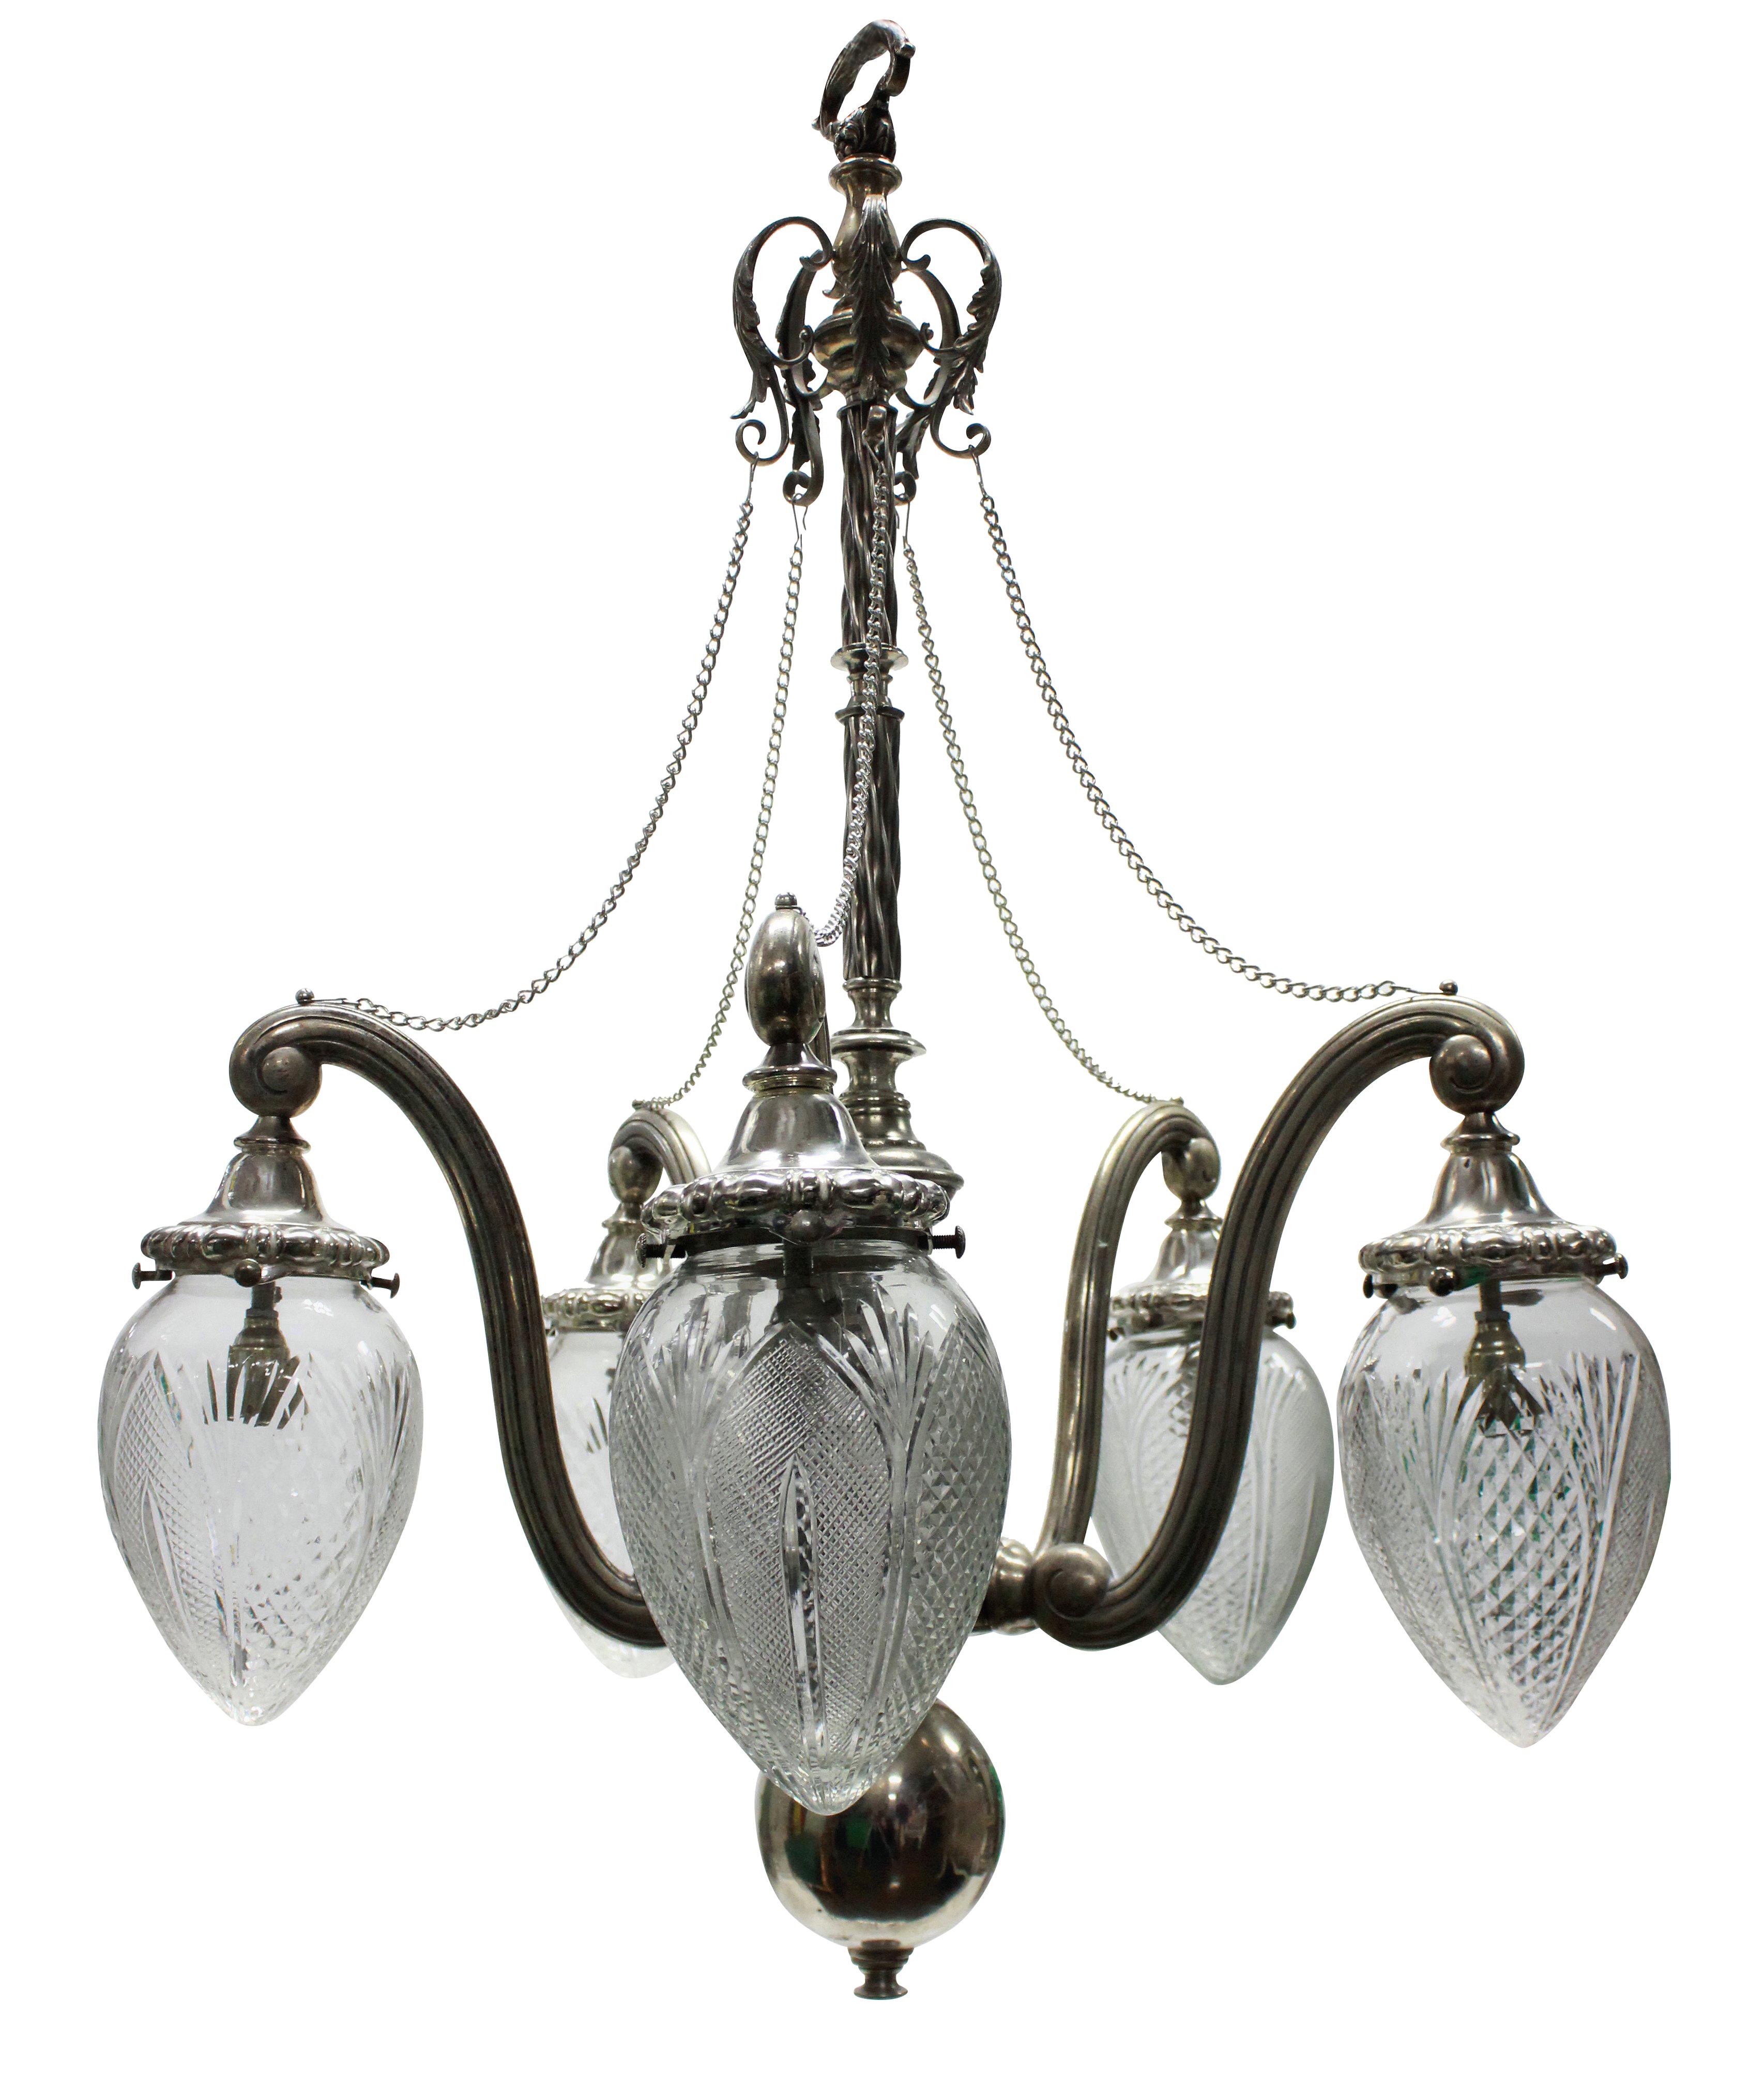 An unusual English Victorian silver plated pendant light with five branches, each holding a cut glass shade.